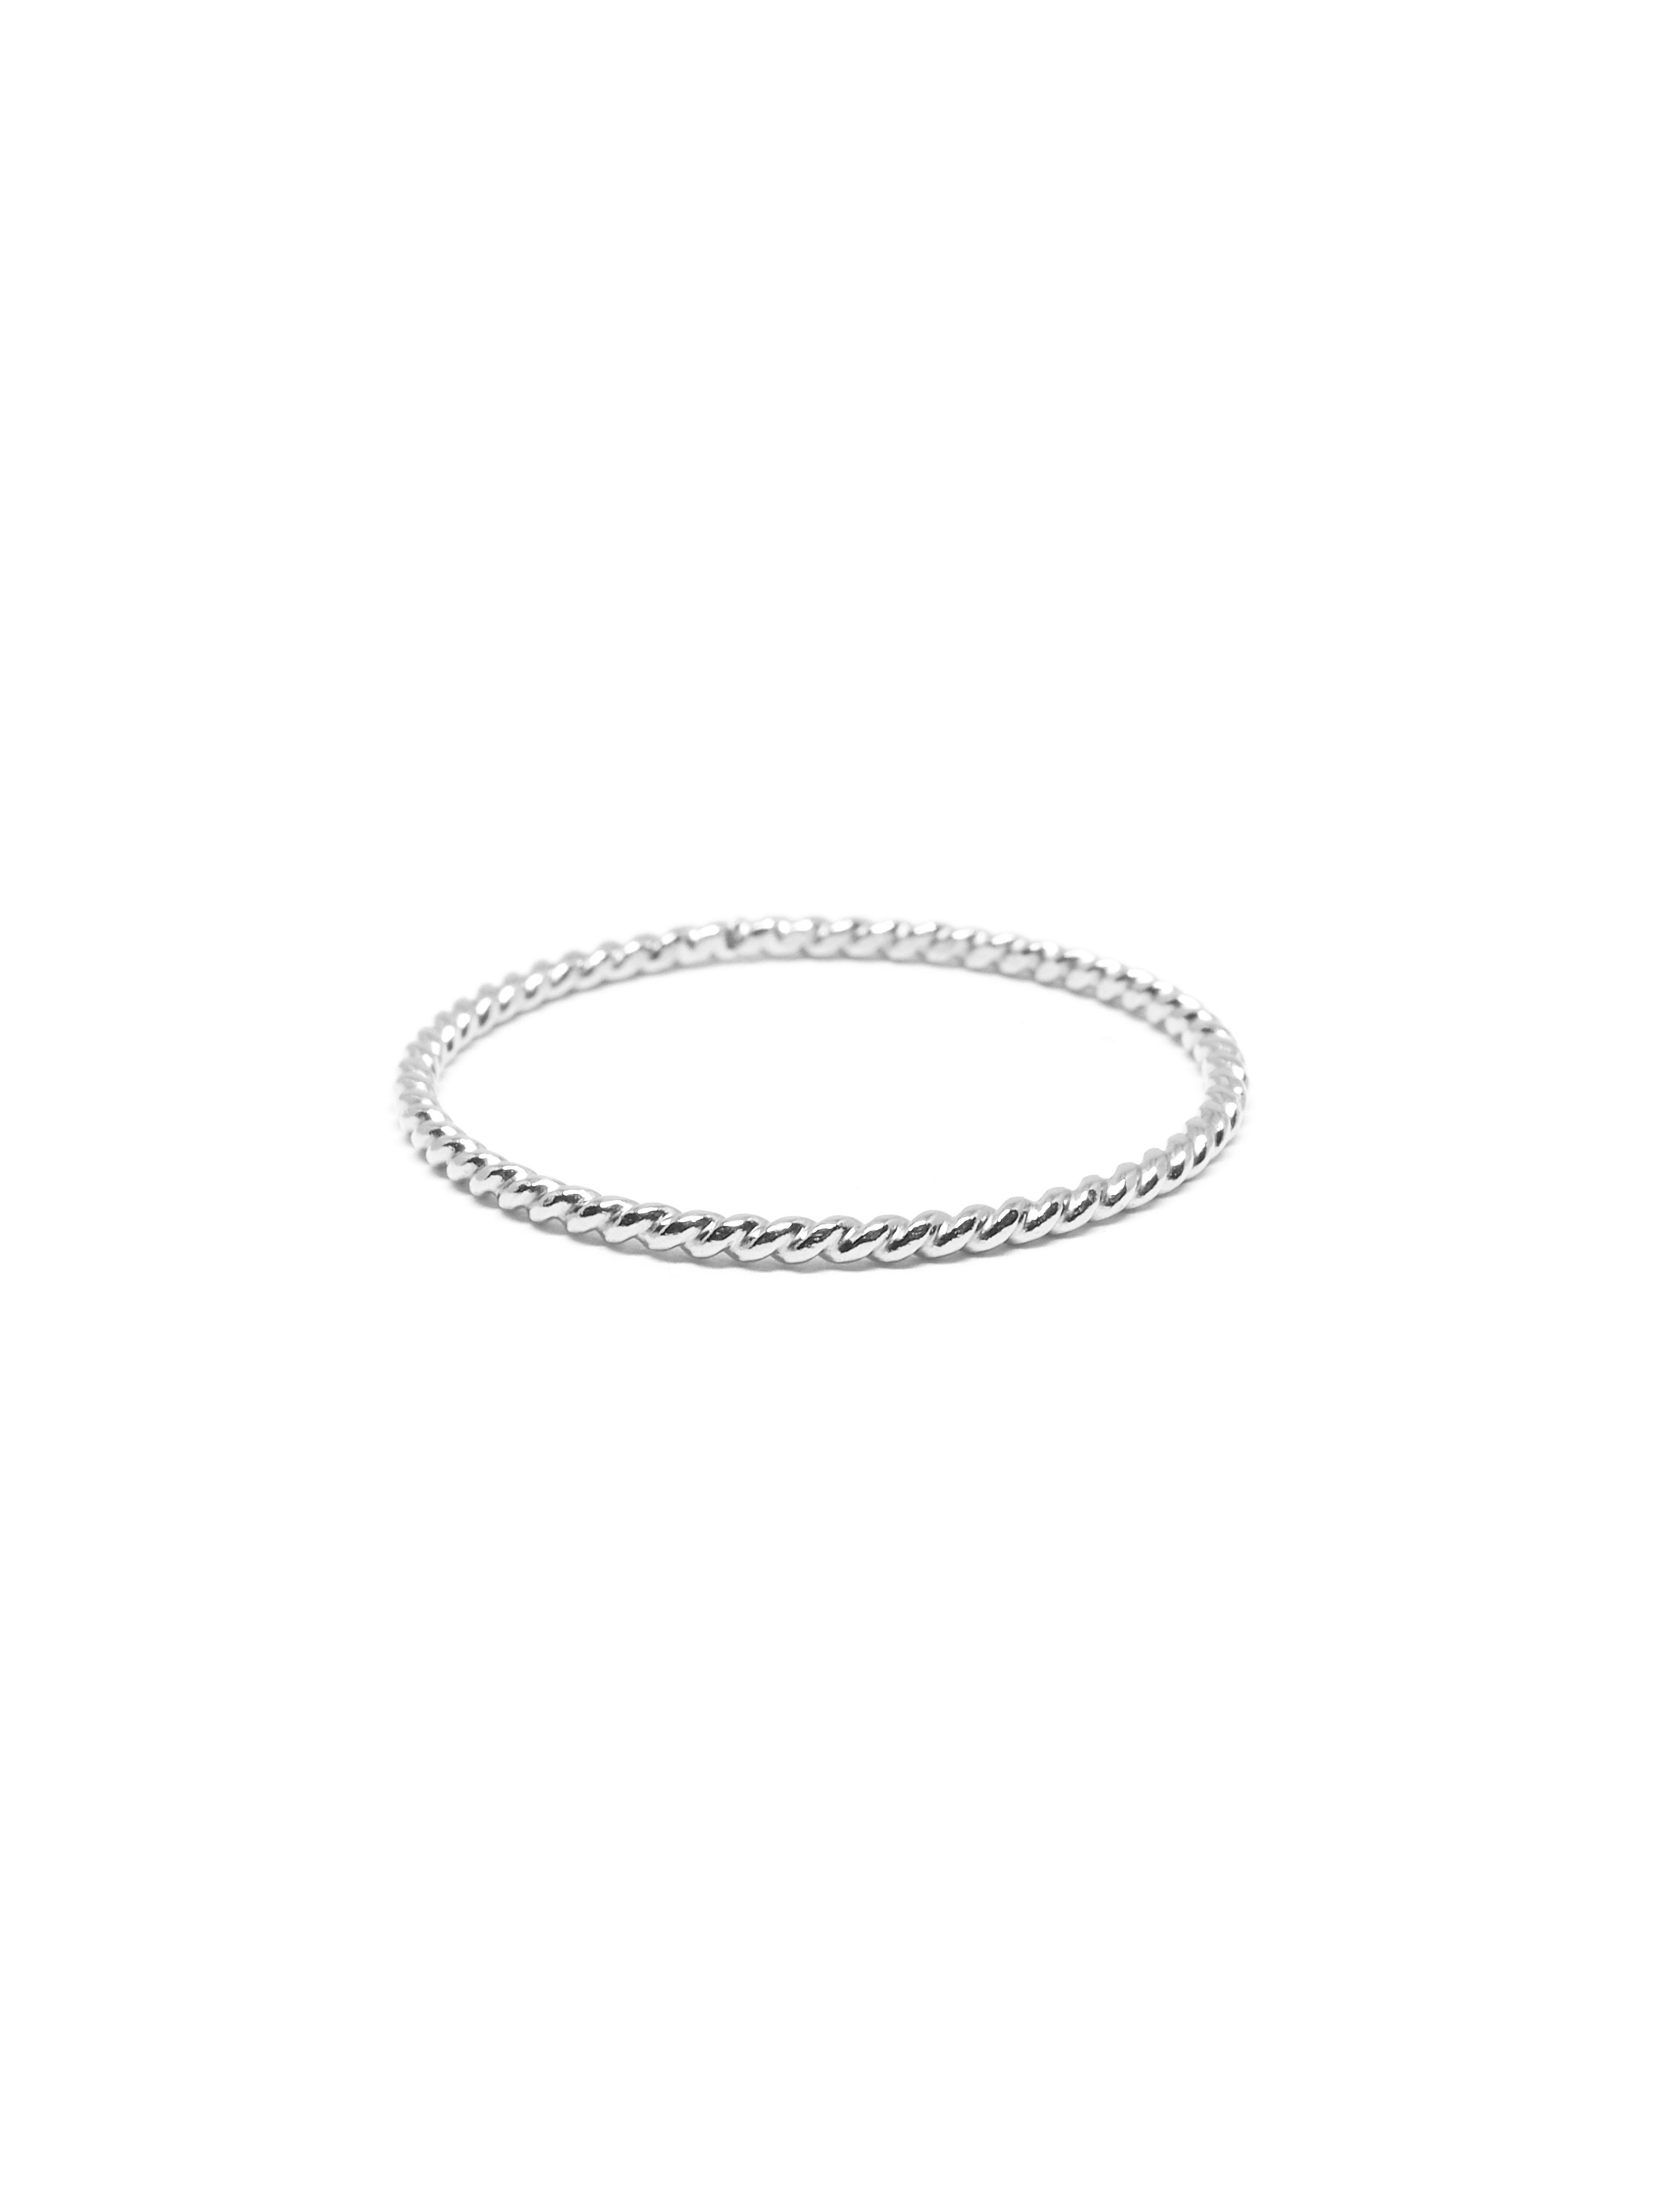 STACKING RING | TWISTED